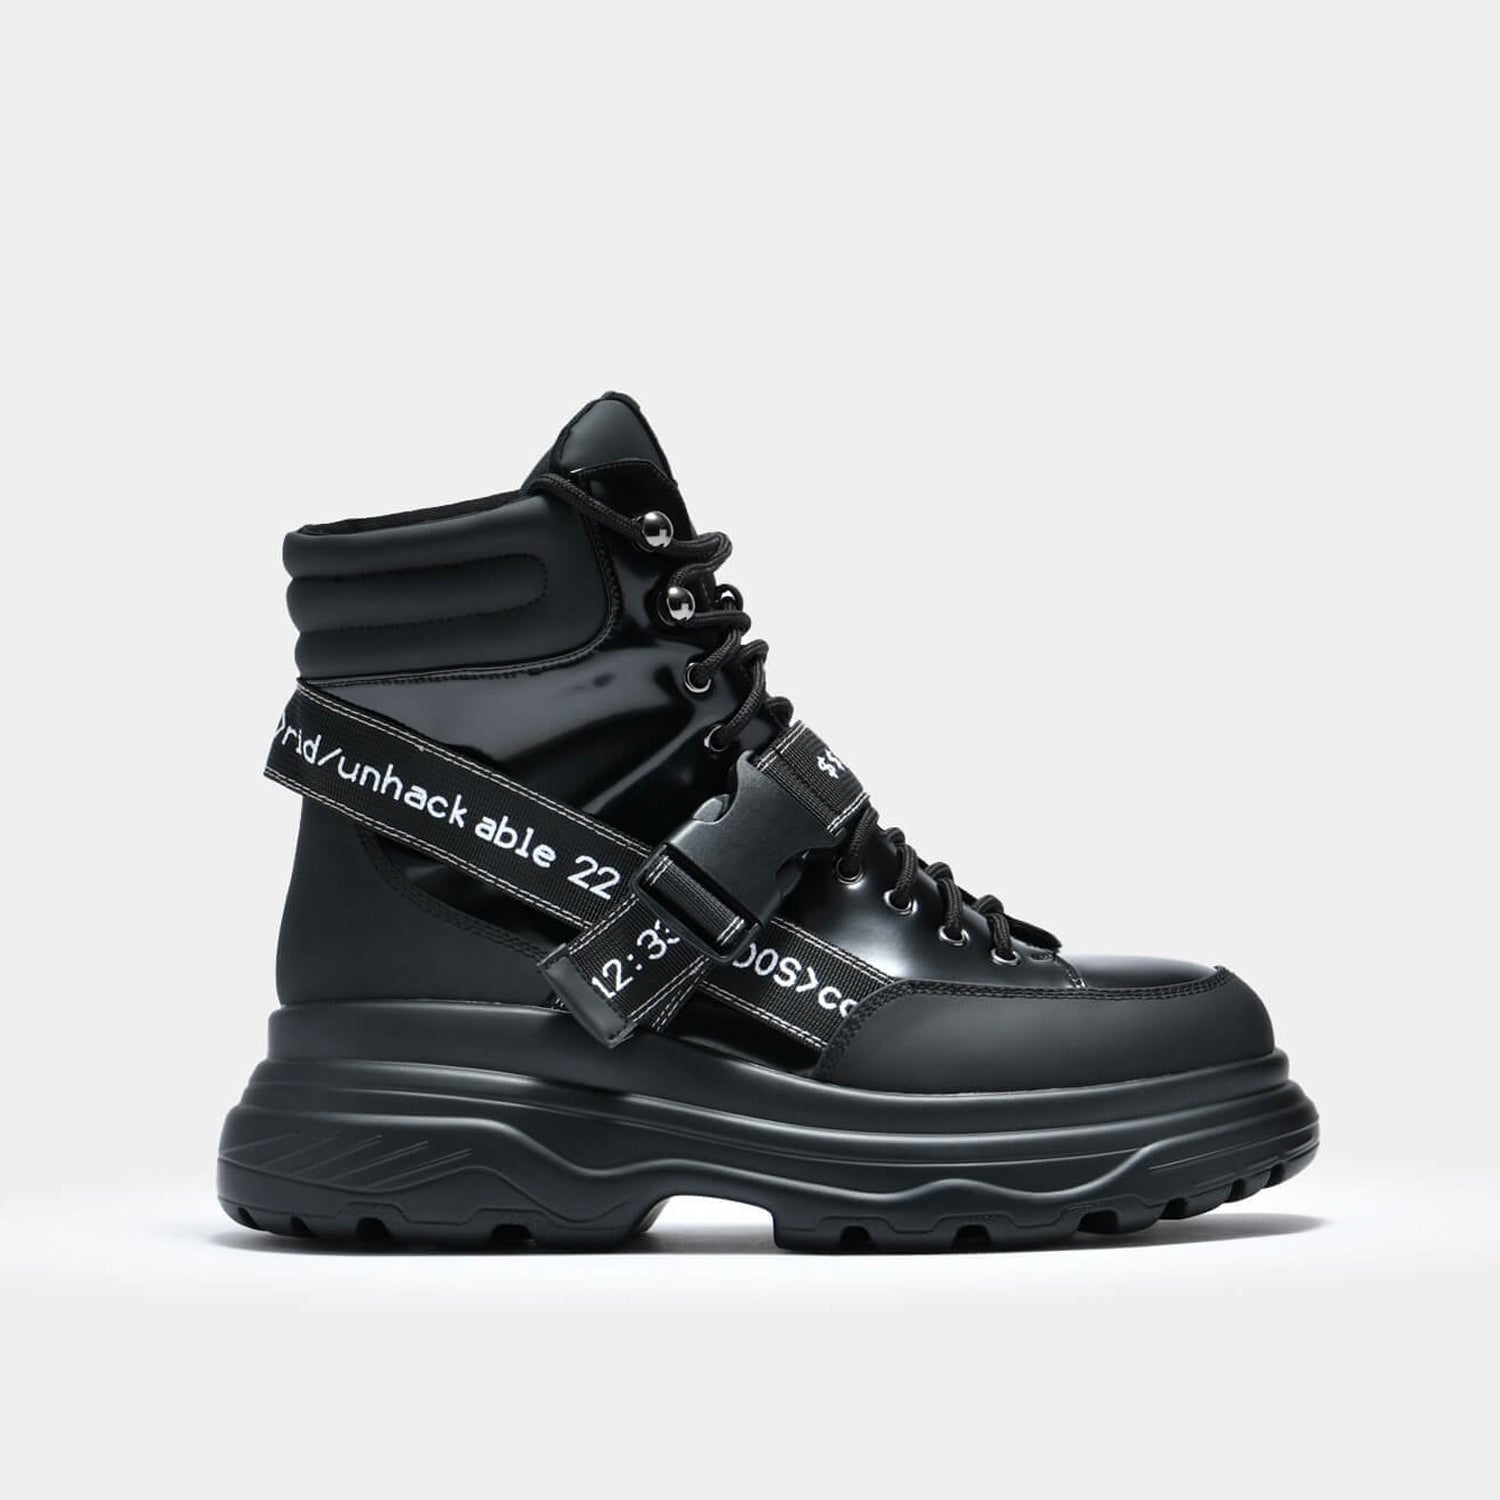 Cypher Men's Black Trail Boots - Ankle Boots - KOI Footwear - Black - Side View